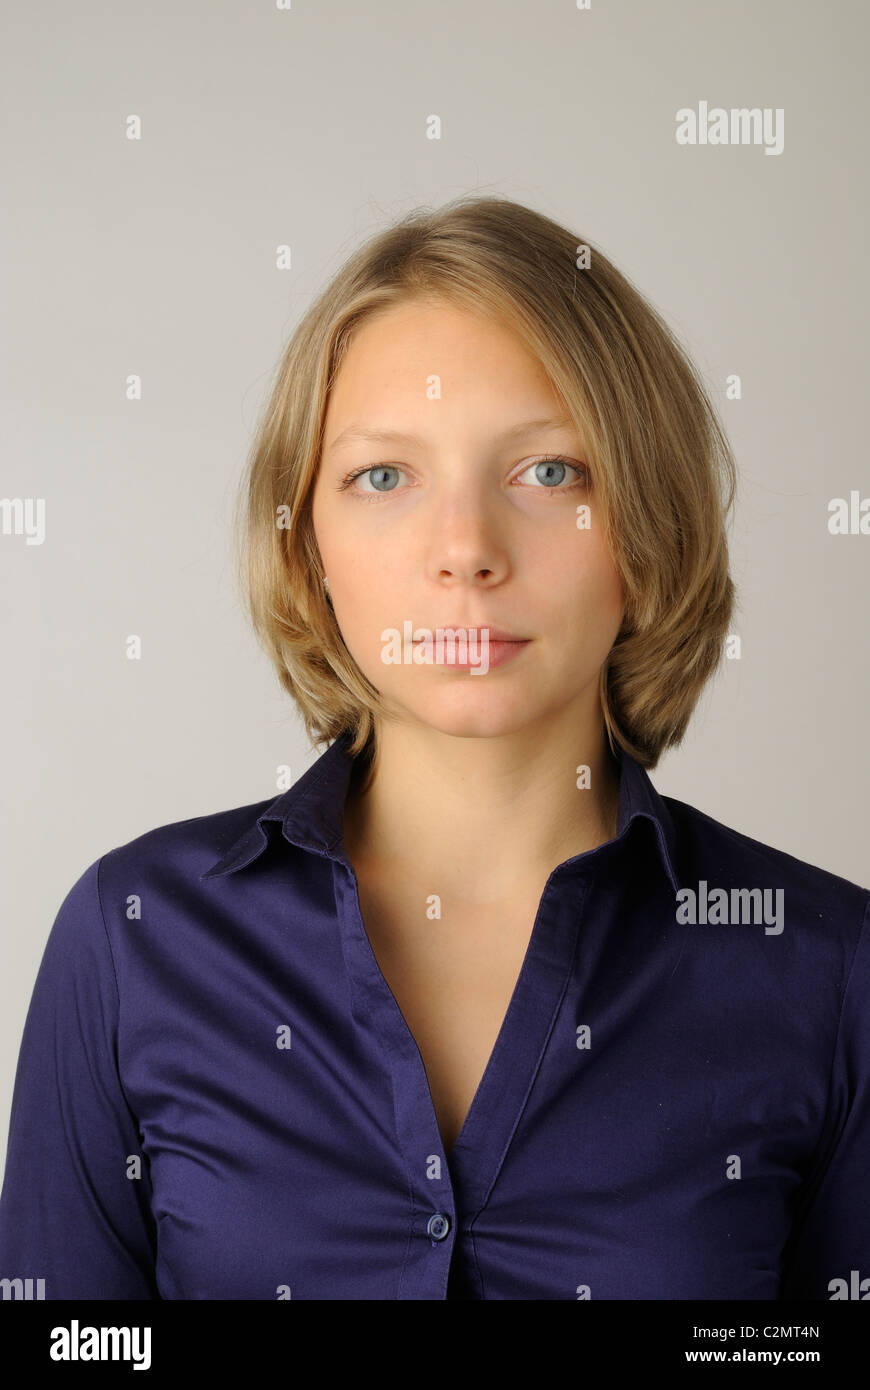 Young woman, serious, portrait Stock Photo